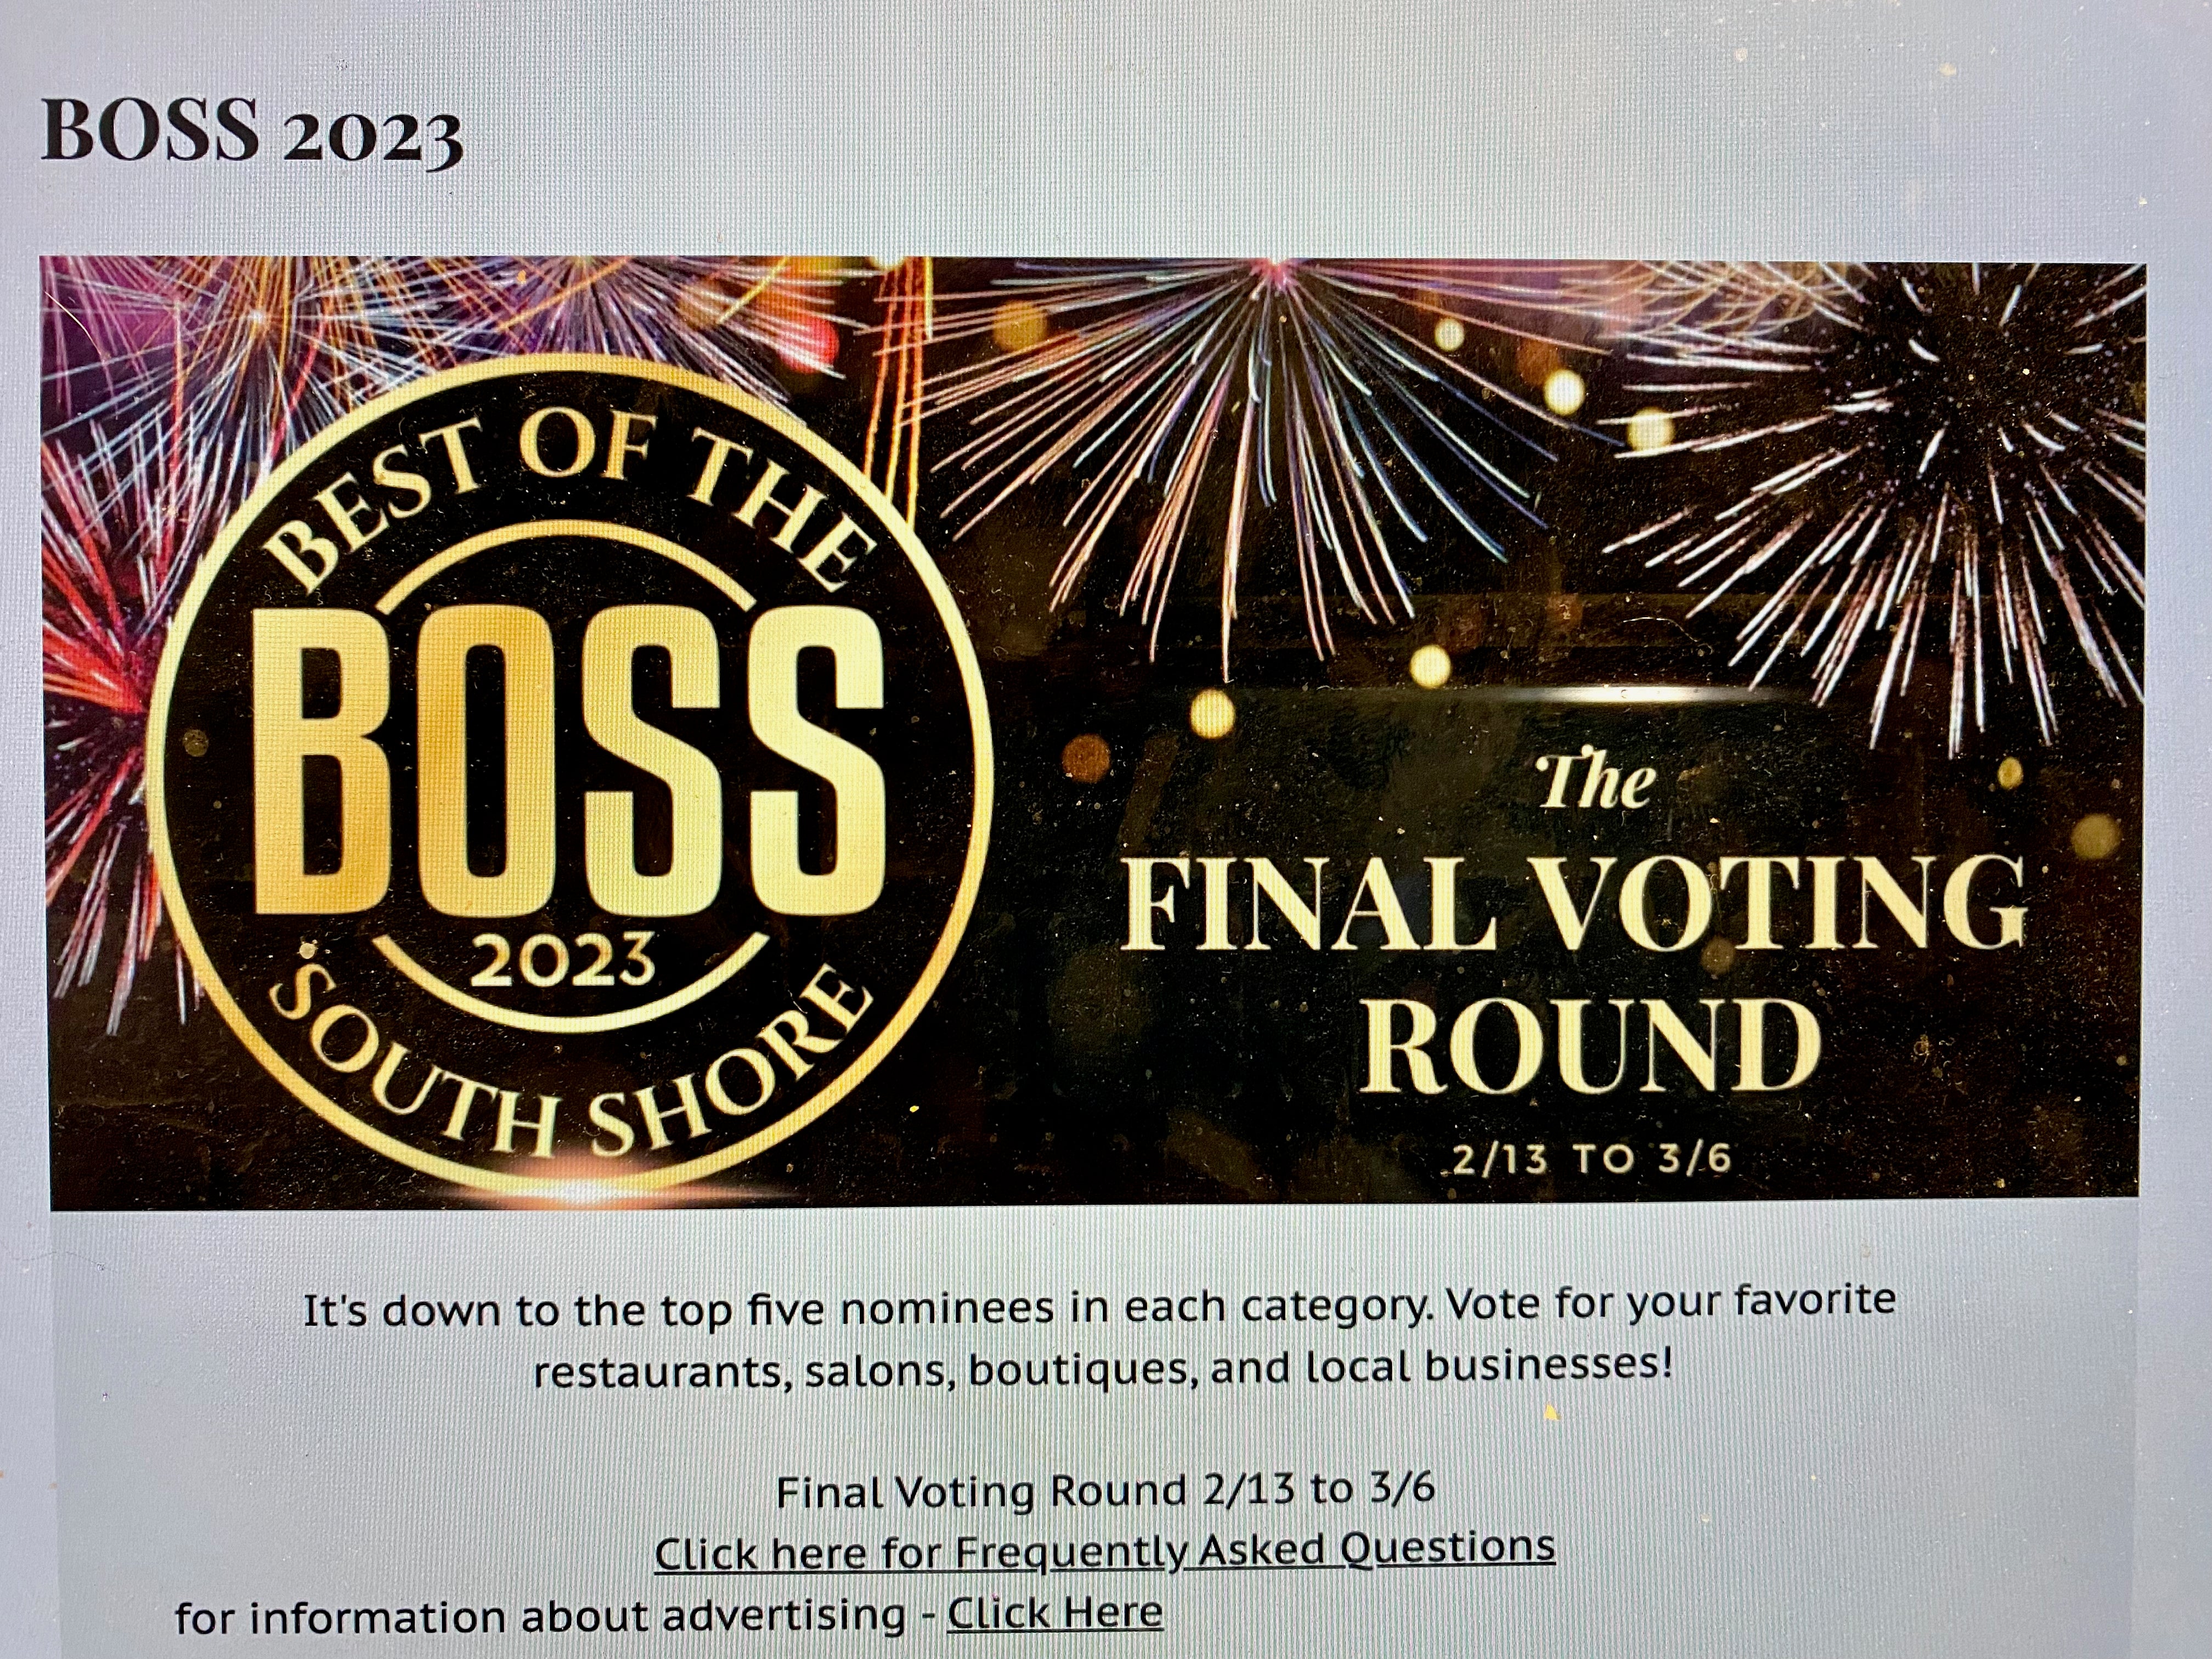 Nominated for Best of South Shore 2023 BOSS